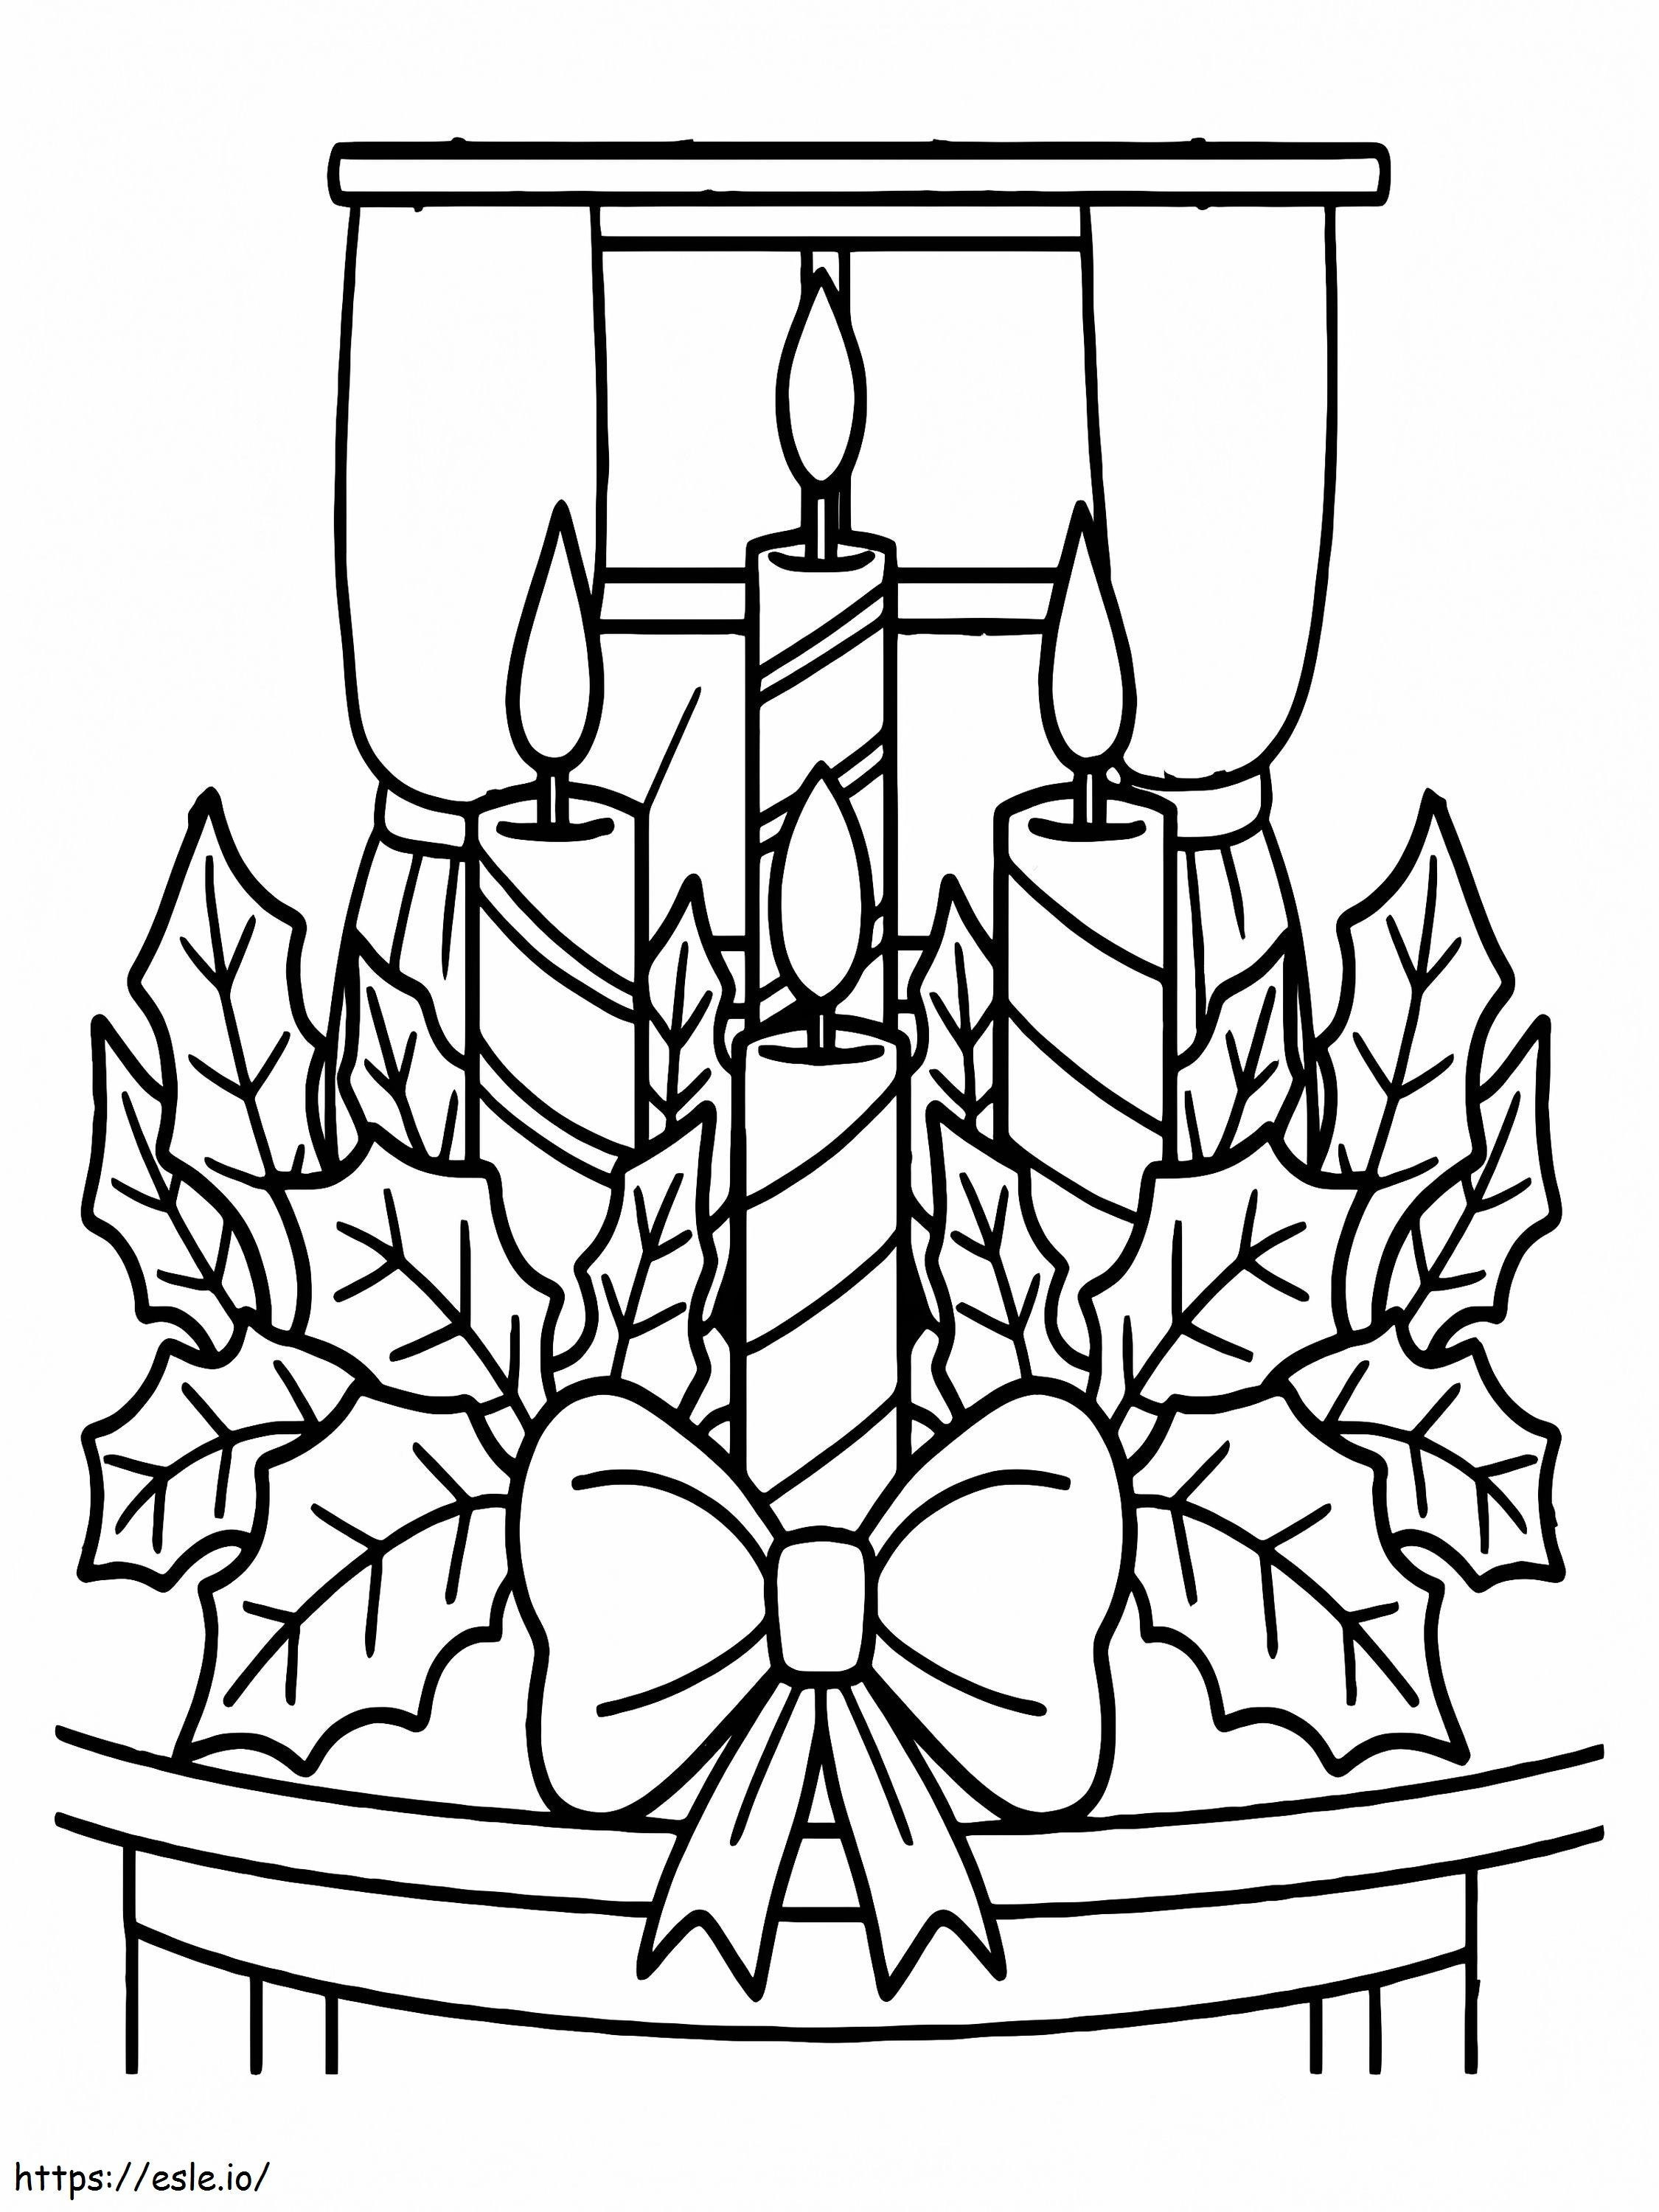 Decorative Christmas Candles coloring page